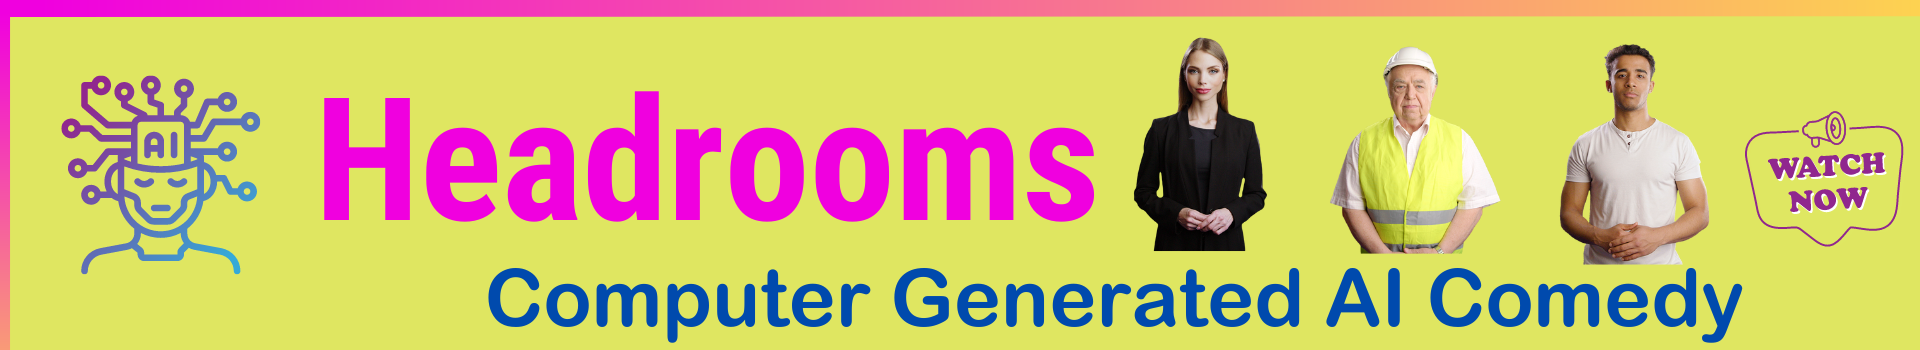 Headrooms Banner 350